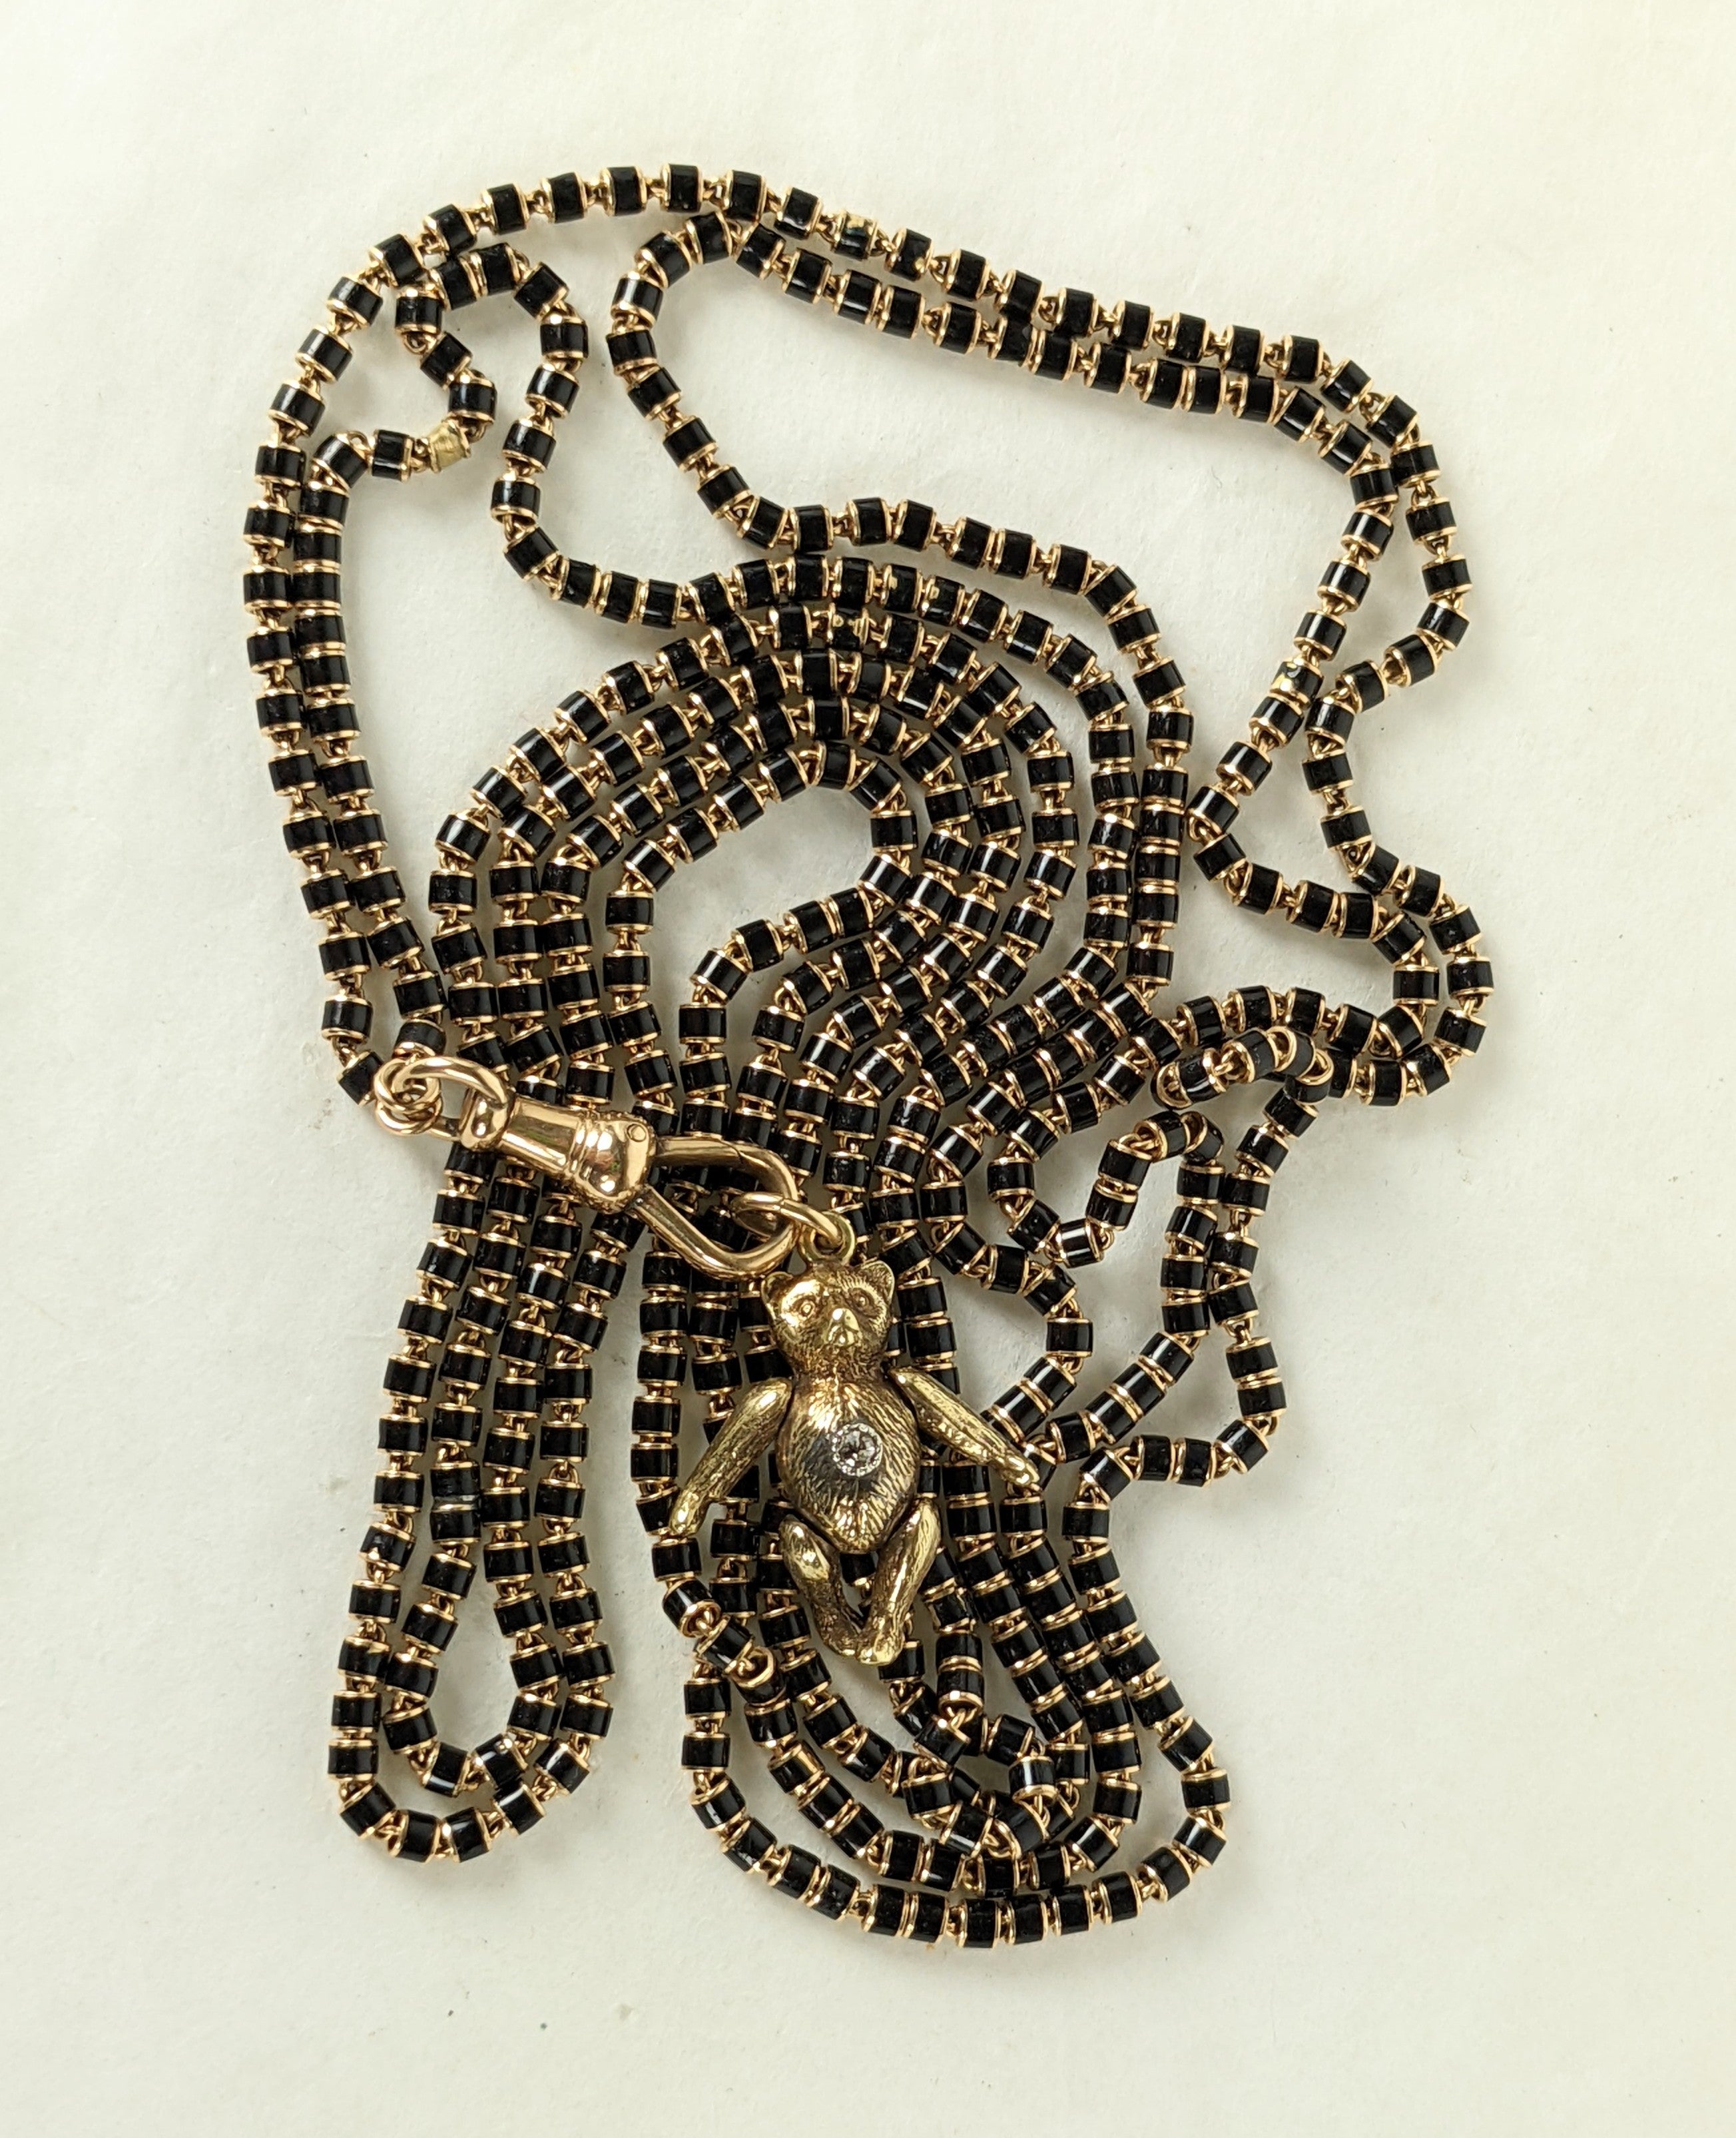 Victorian Long Chain Assemblage made of elements from the late 19th Century. A long black enamel link mourning chain in 14k from the 1880's is married to a mechanical toy teddy bear charm adorned with a single diamond from circa 1910. 
Representing